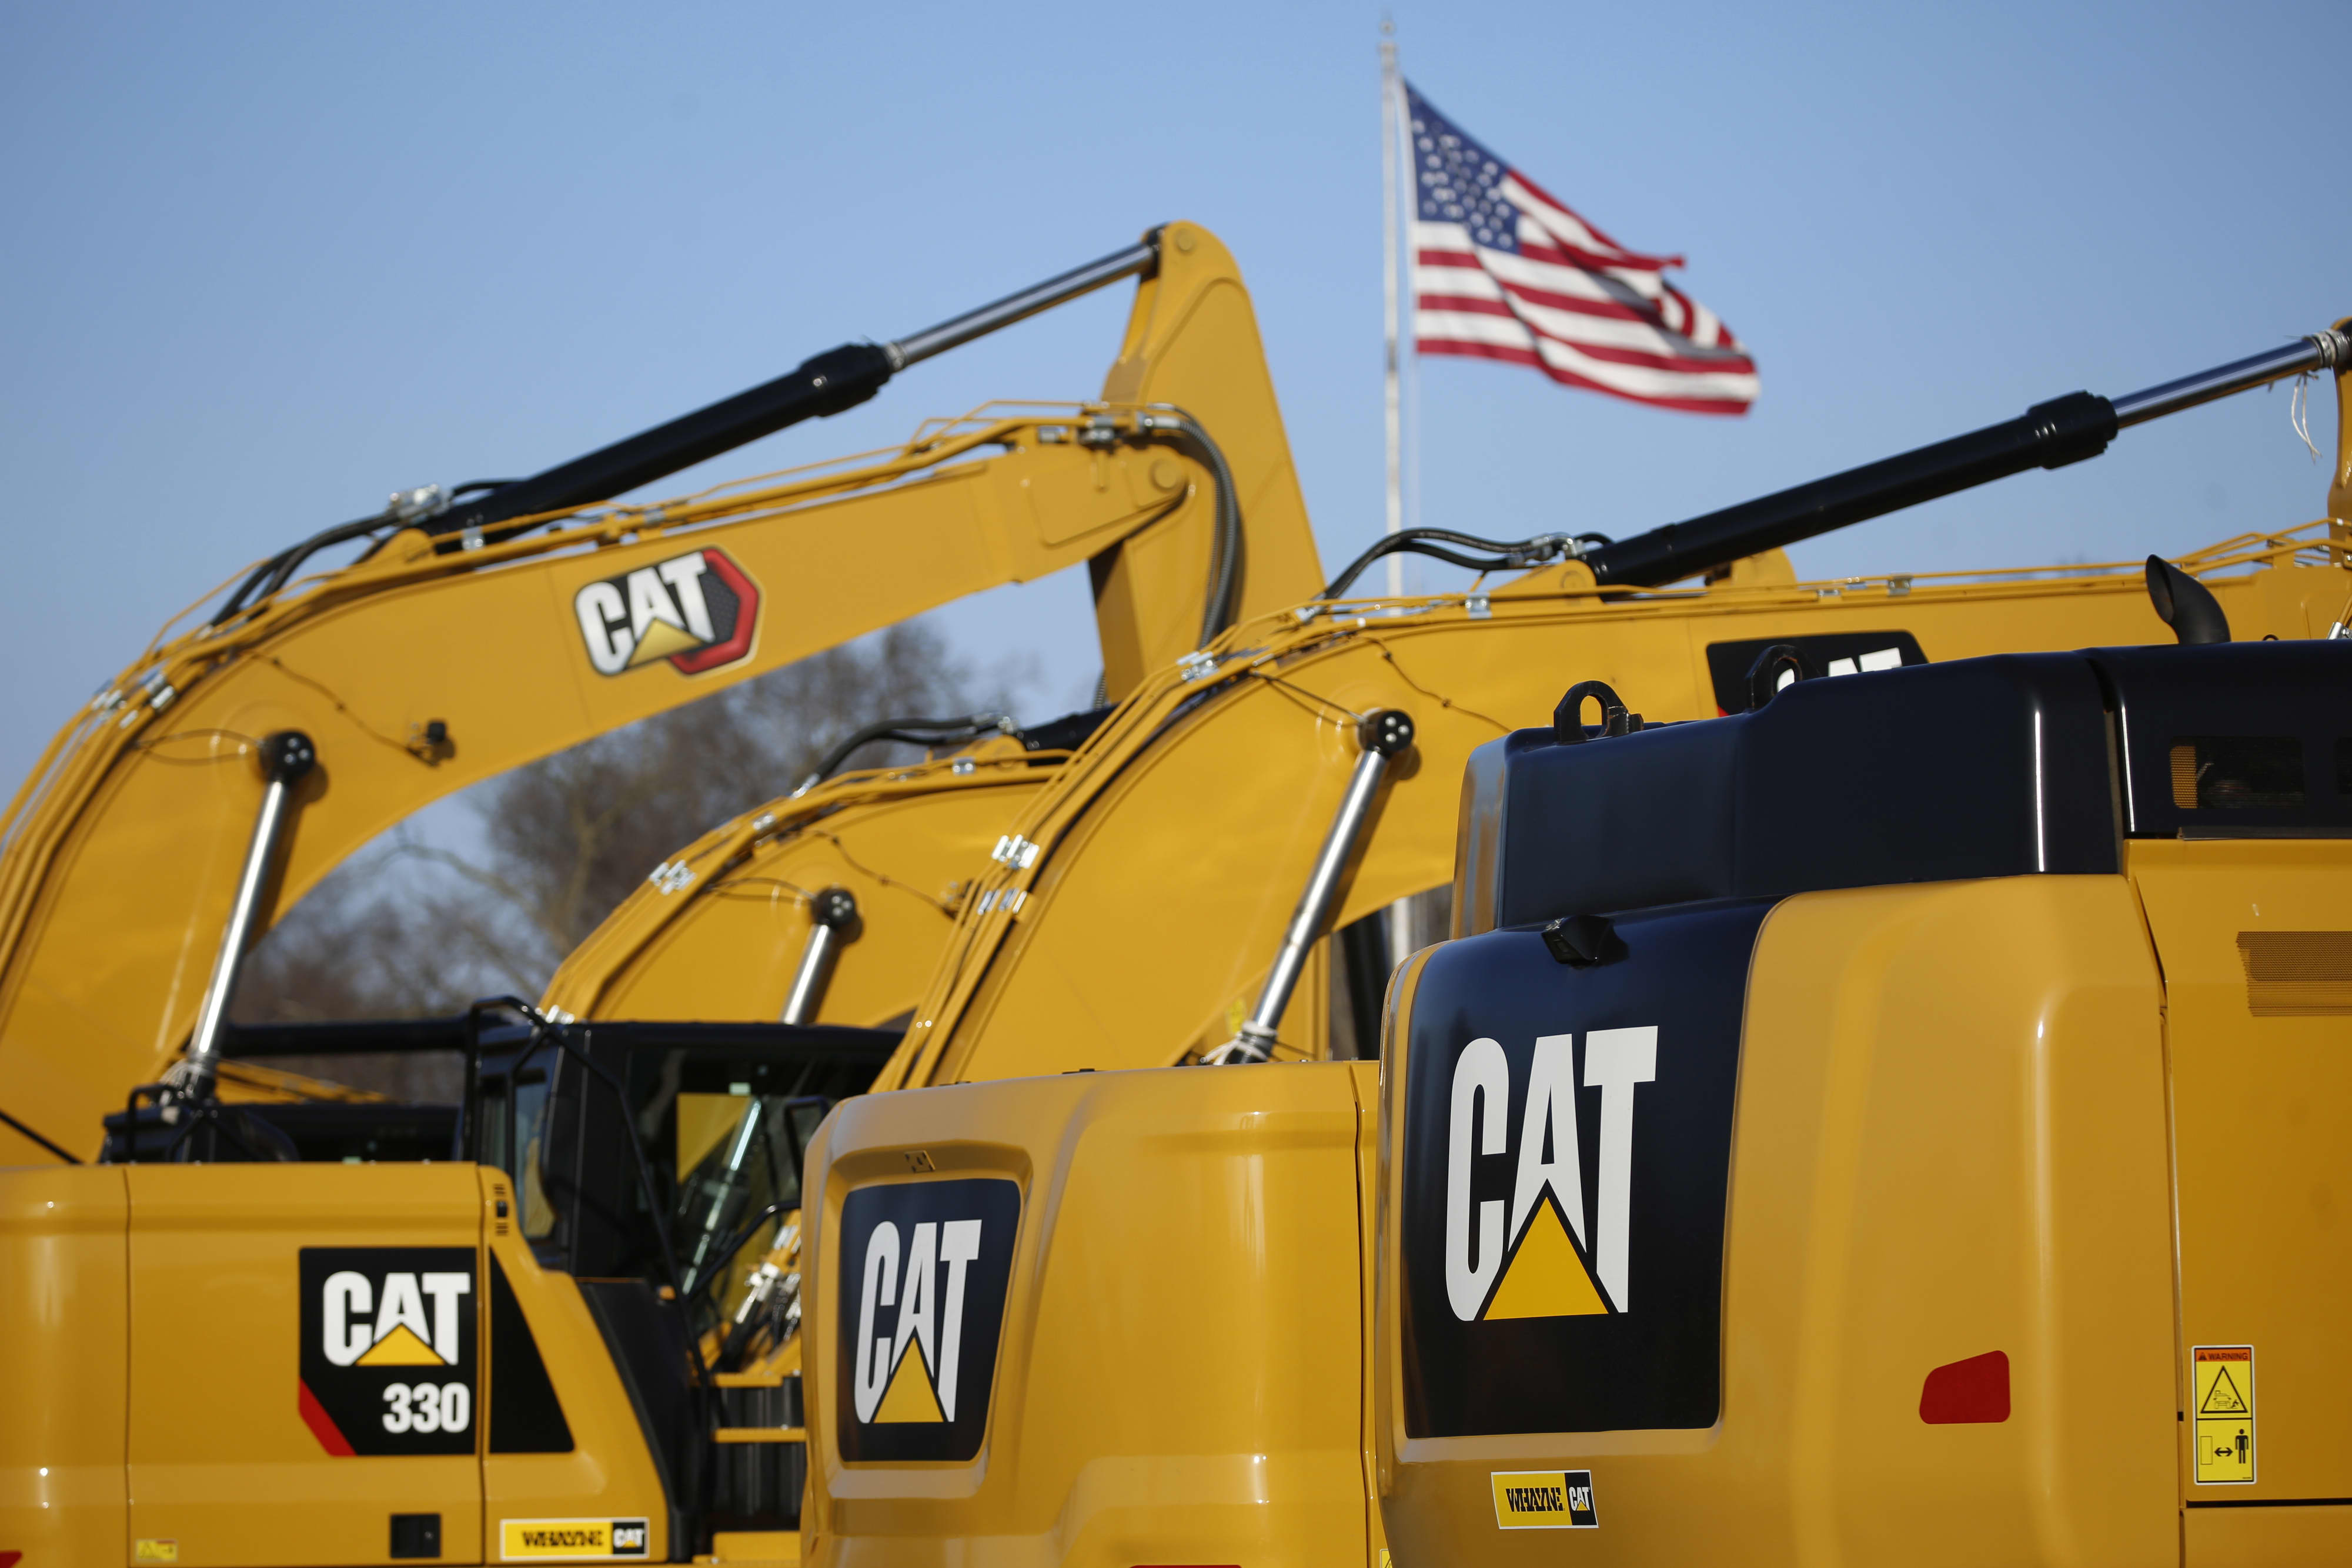 Despite an unwarranted share slide, industrial powerhouse Caterpillar delivers a solid Q4 